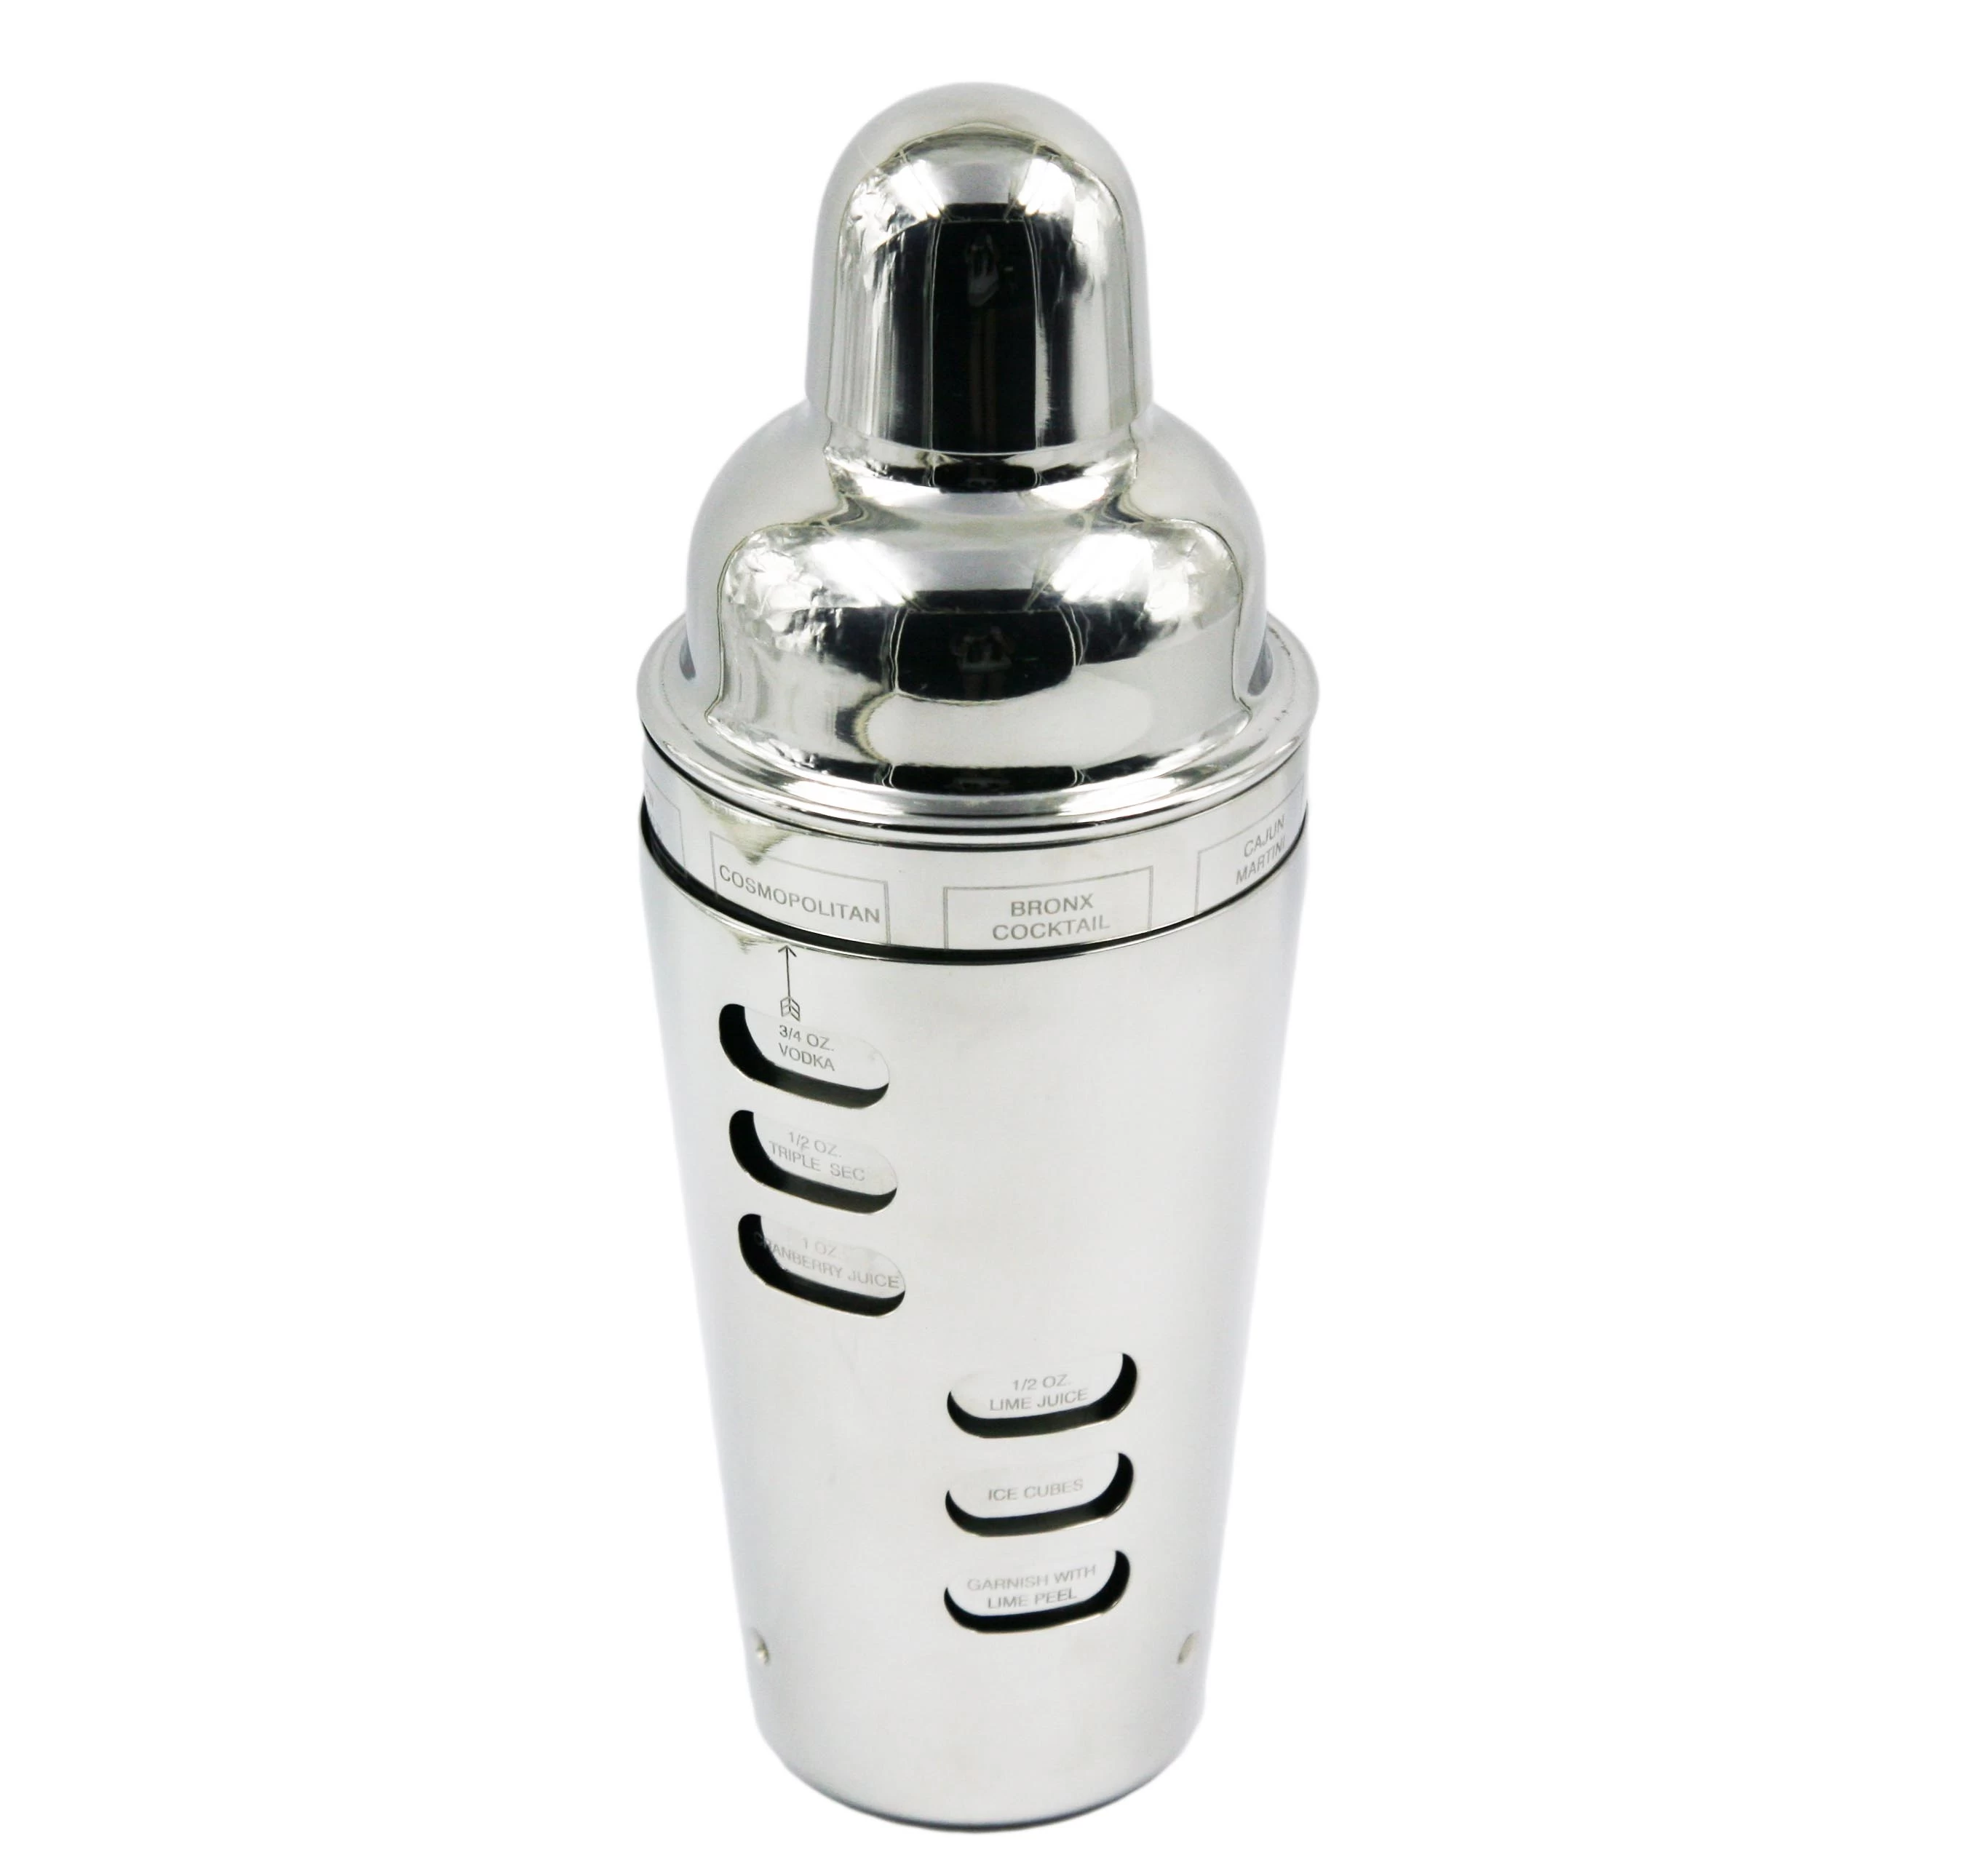 350ml Stainless steel scale cocktail shaker EB-B48